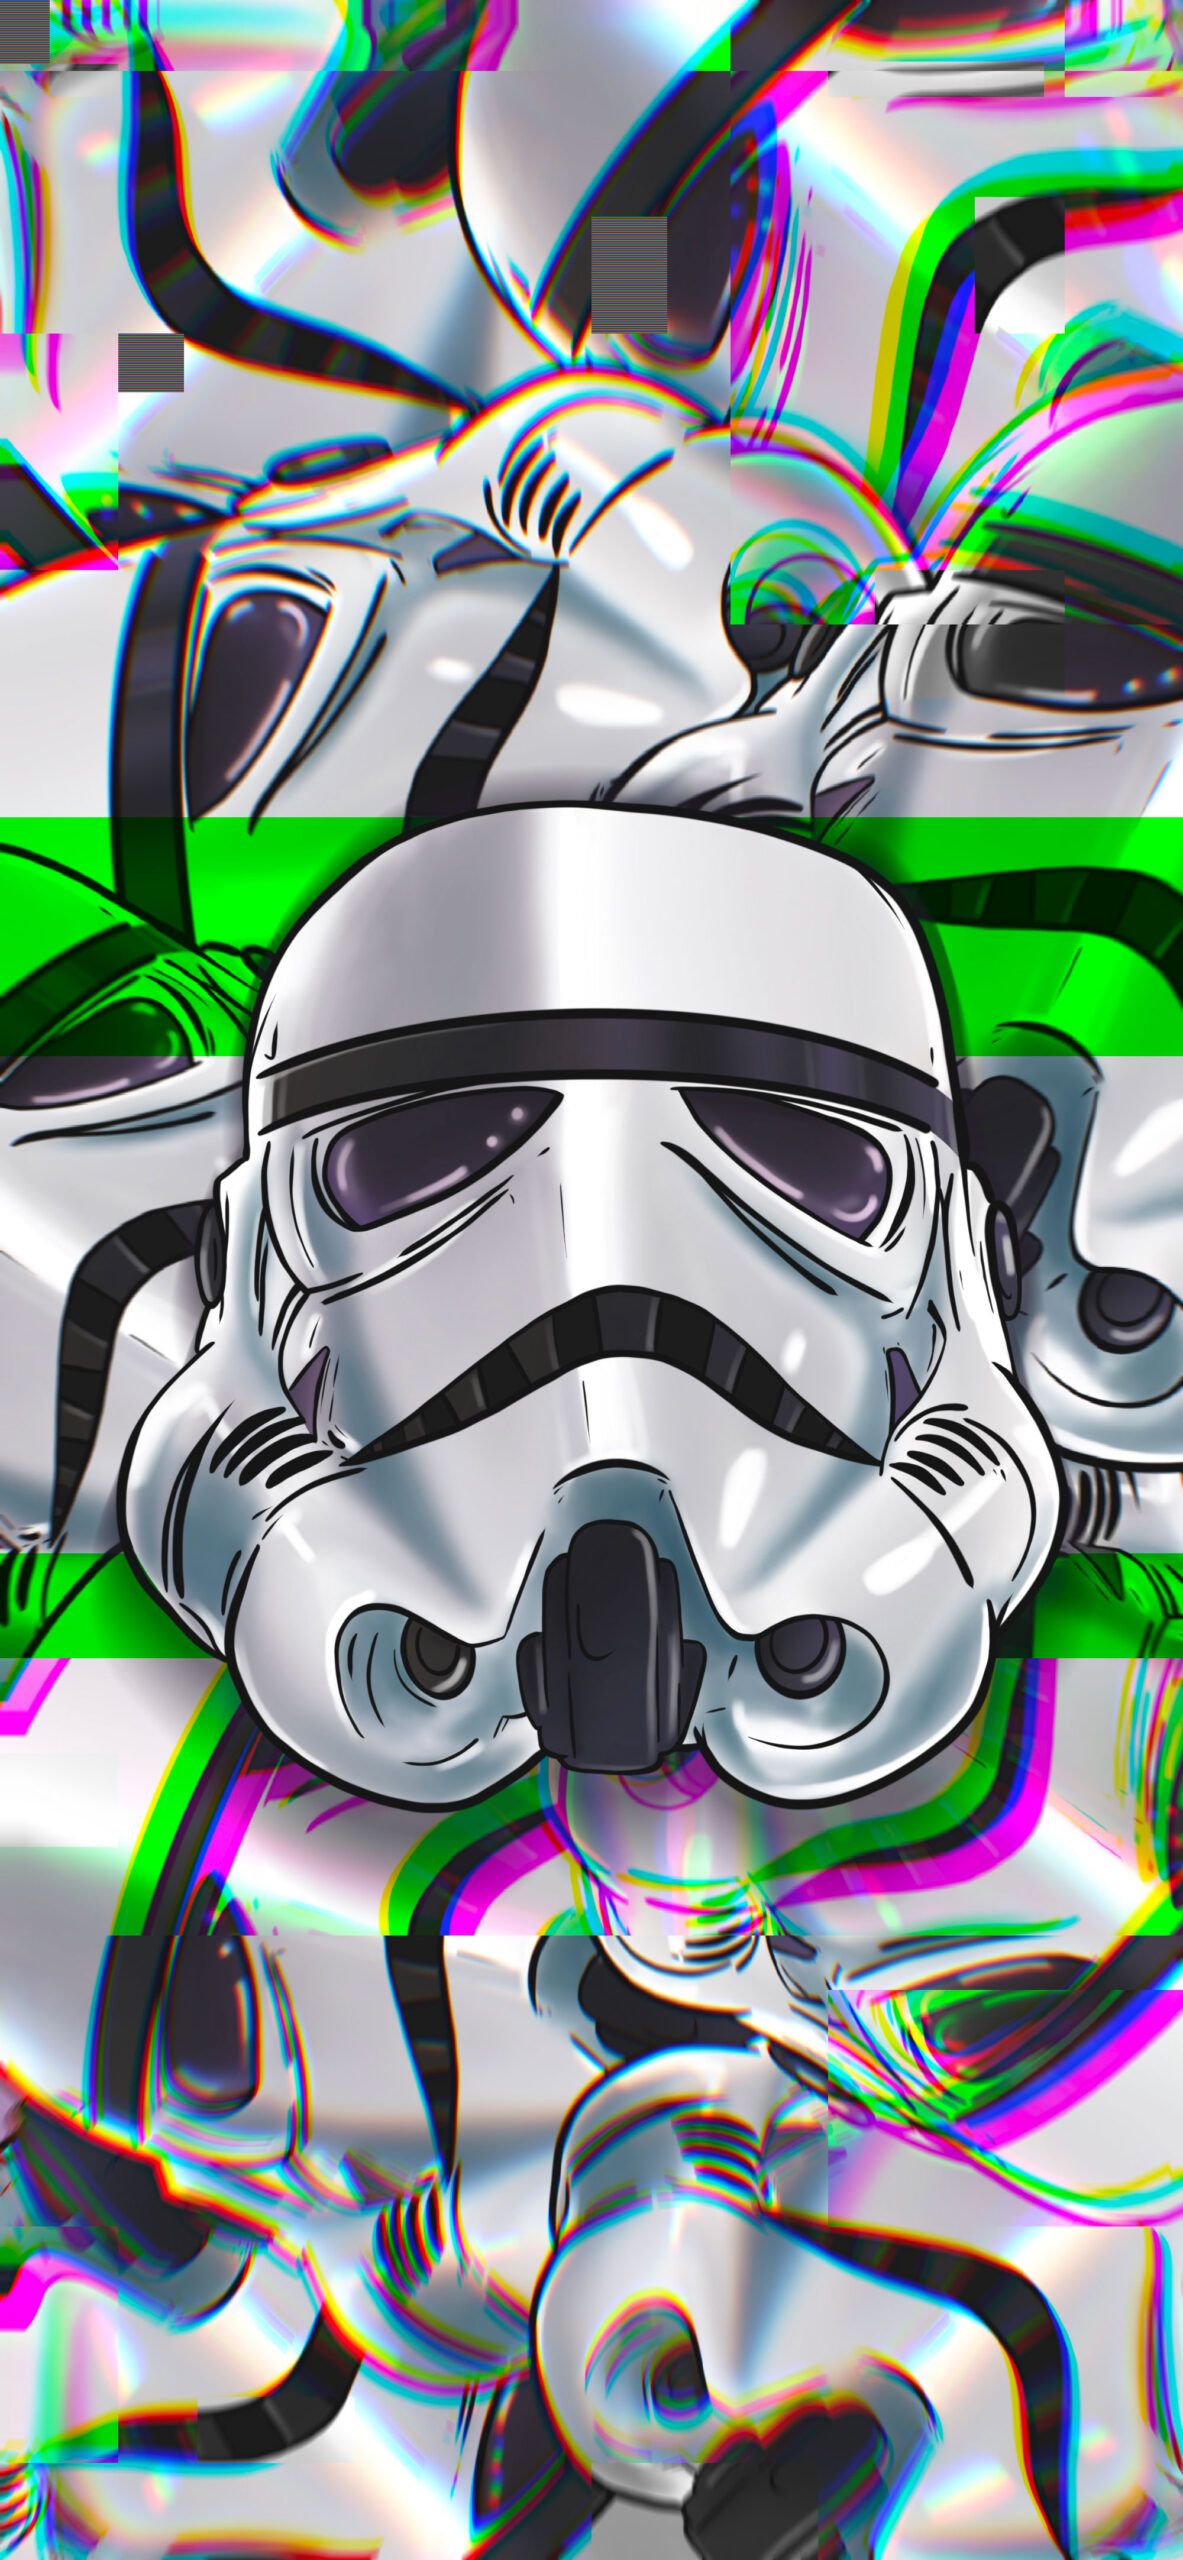 A Stormtrooper's helmet on a green and purple background - Glitch, Star Wars